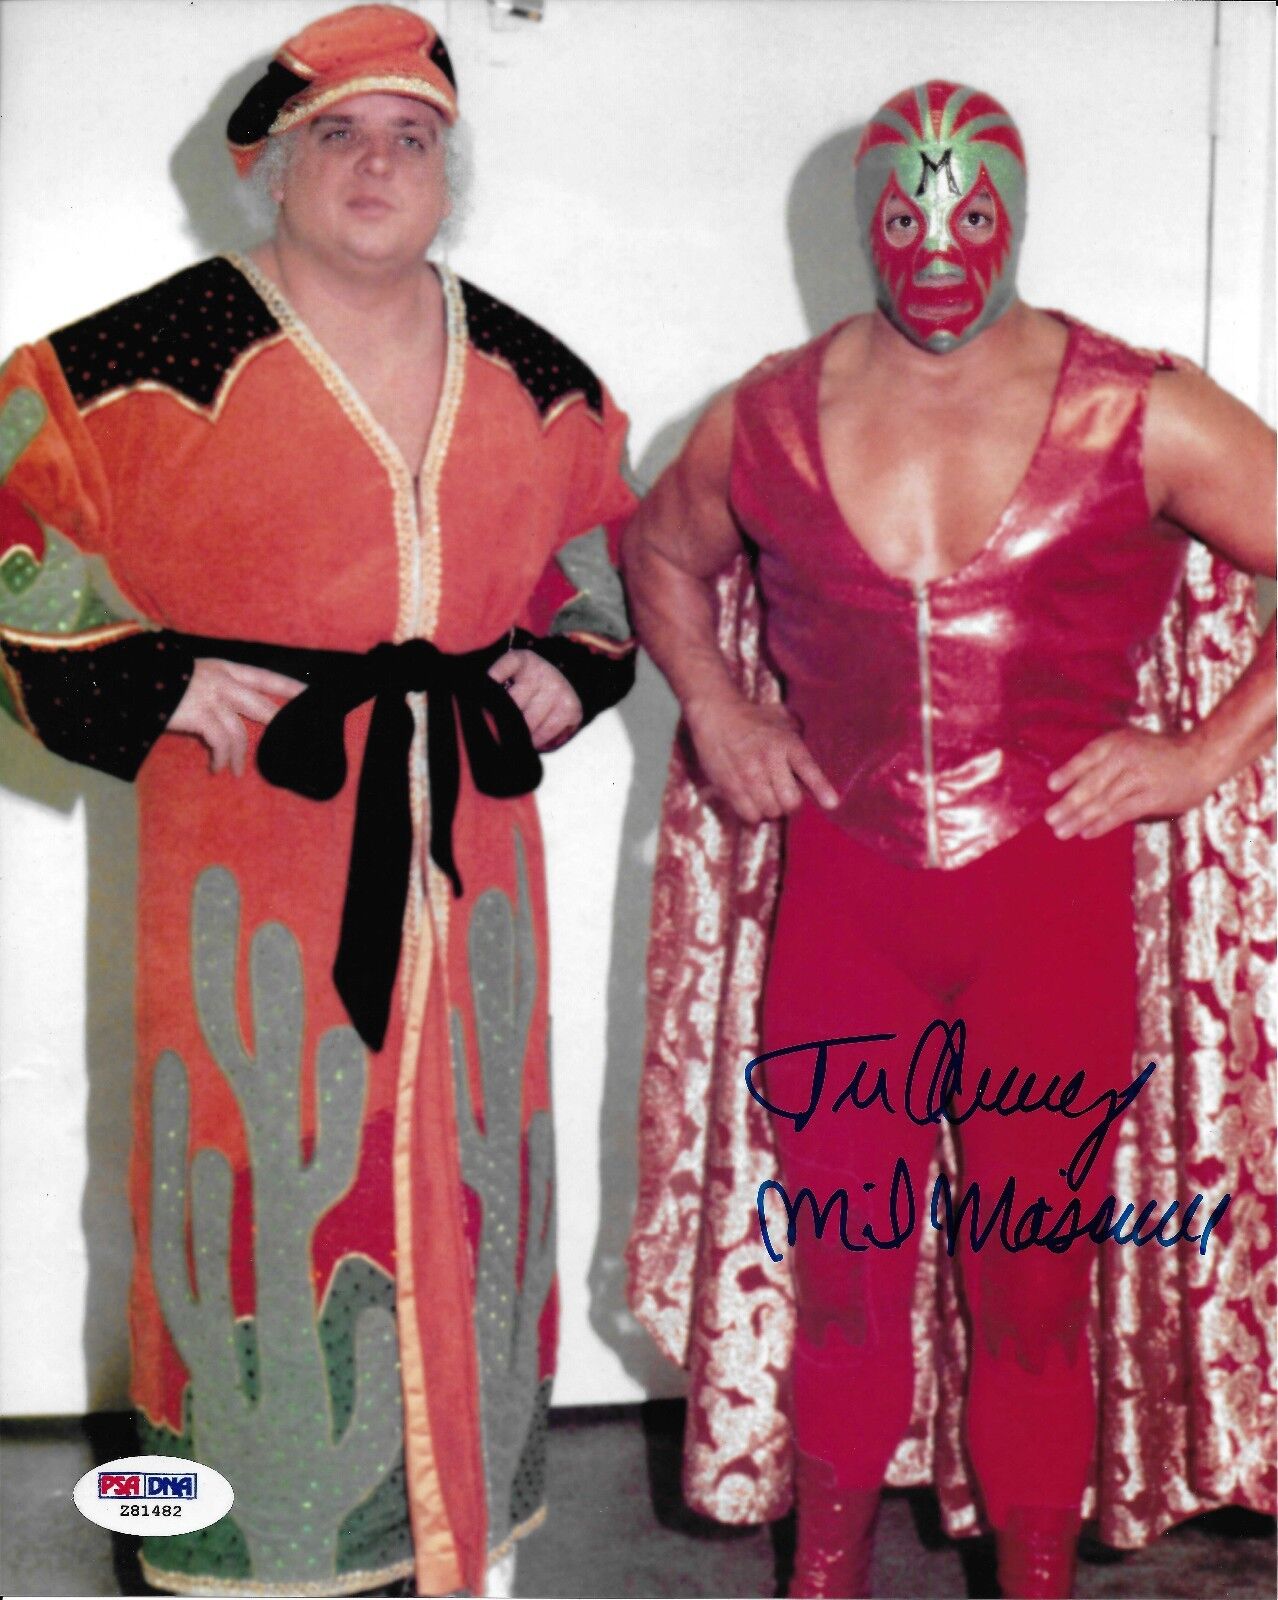 Mil Mascaras Signed WWE 8x10 Photo Poster painting PSA/DNA COA NWA Auto'd Picture w Dusty Rhodes